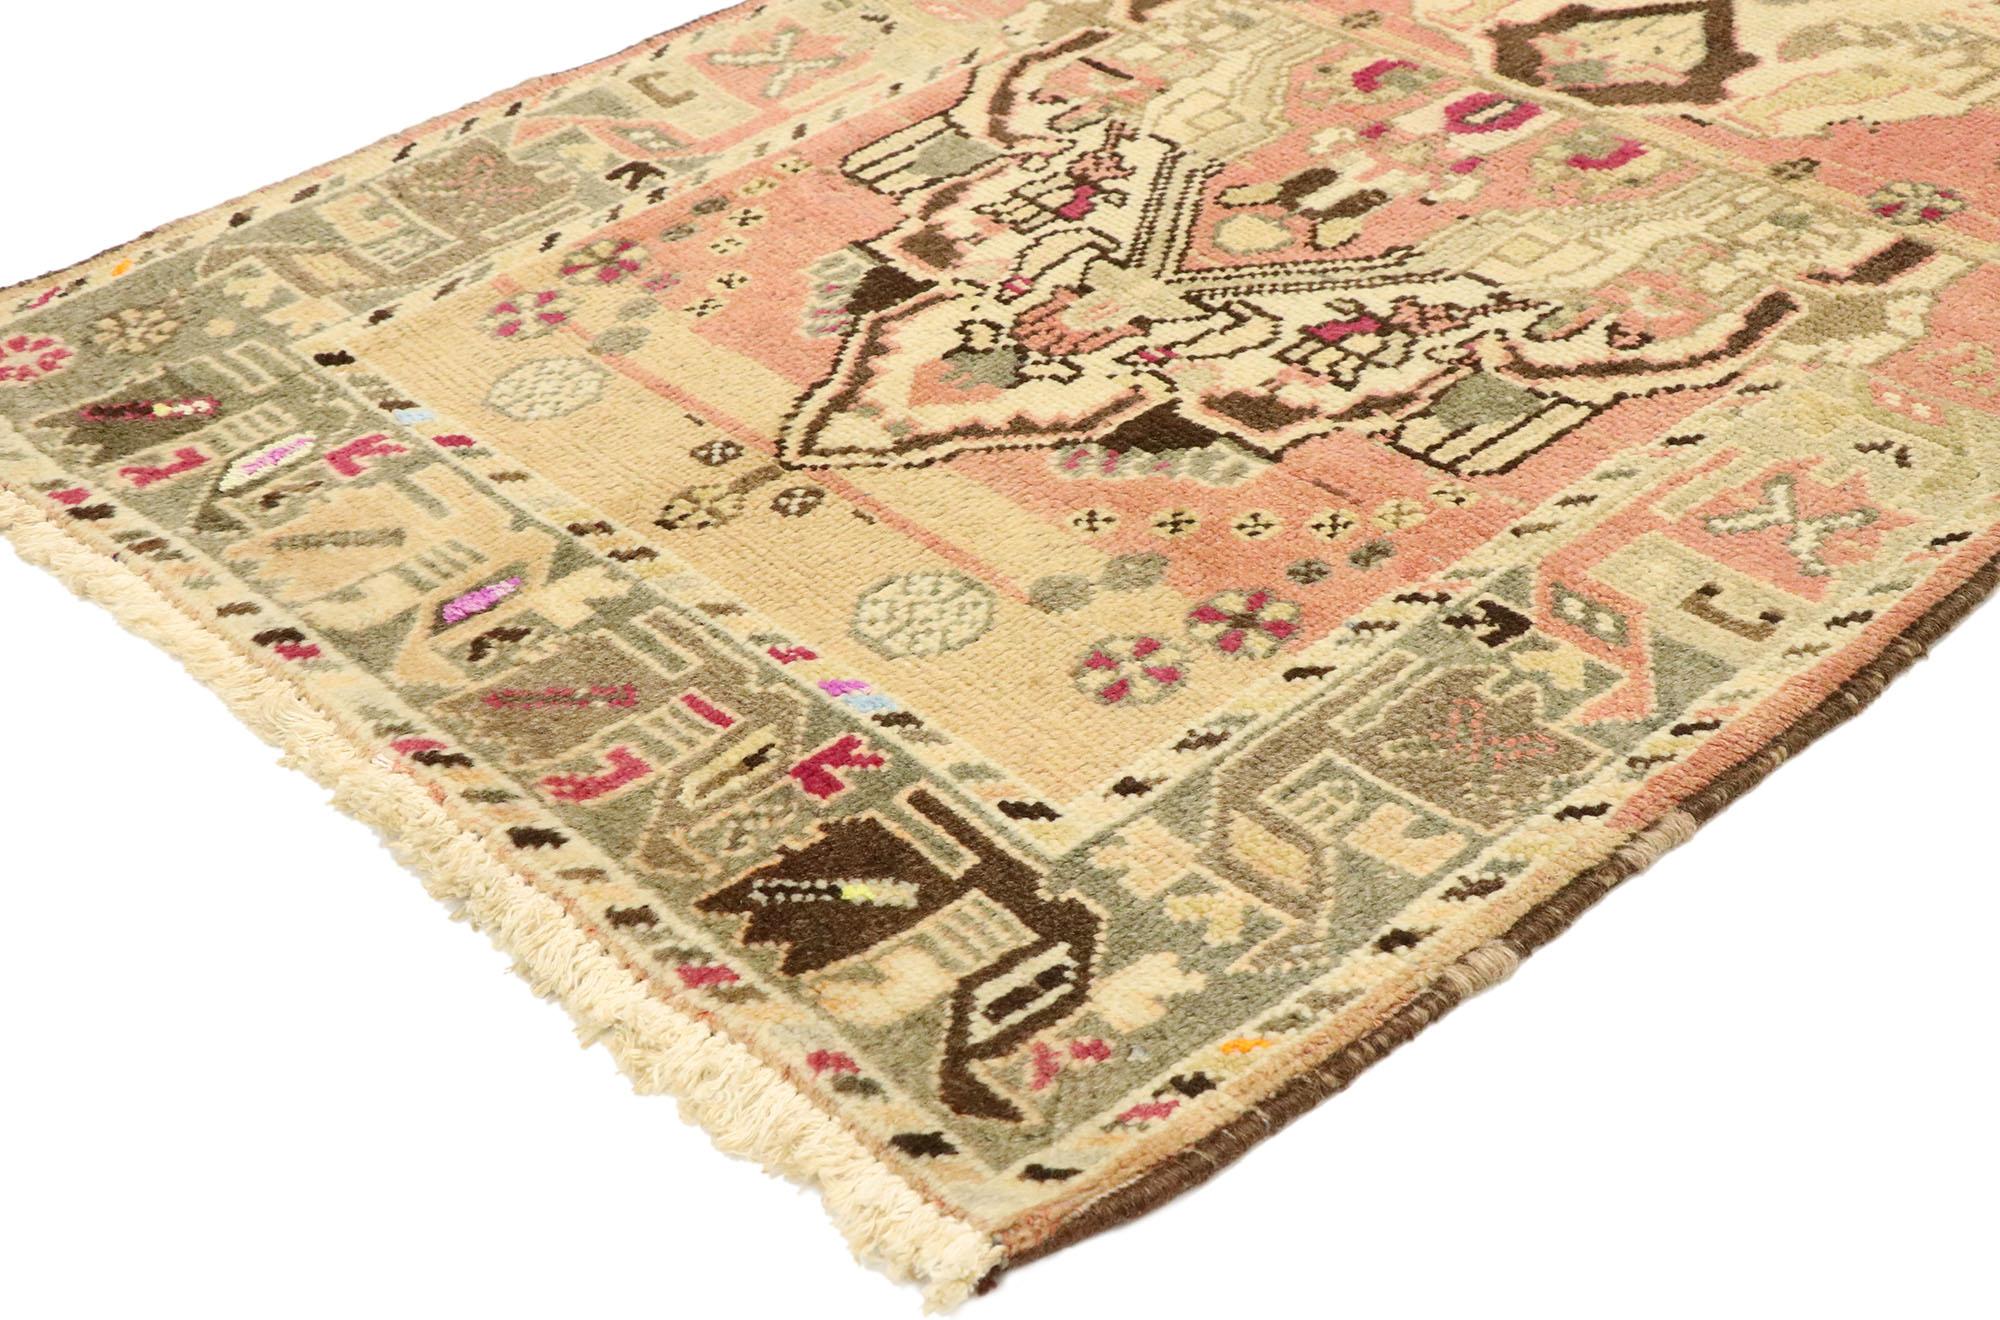 75751 Vintage Persian Bakhtiari Rug, 02'07 x 04'01.
Wabi-Sabi intertwines with Nomadic Boho Chic in this hand-knotted wool vintage Persian Bakhtiari rug. The composition unfolds in two compartments, each featuring a partial medallion adorned with